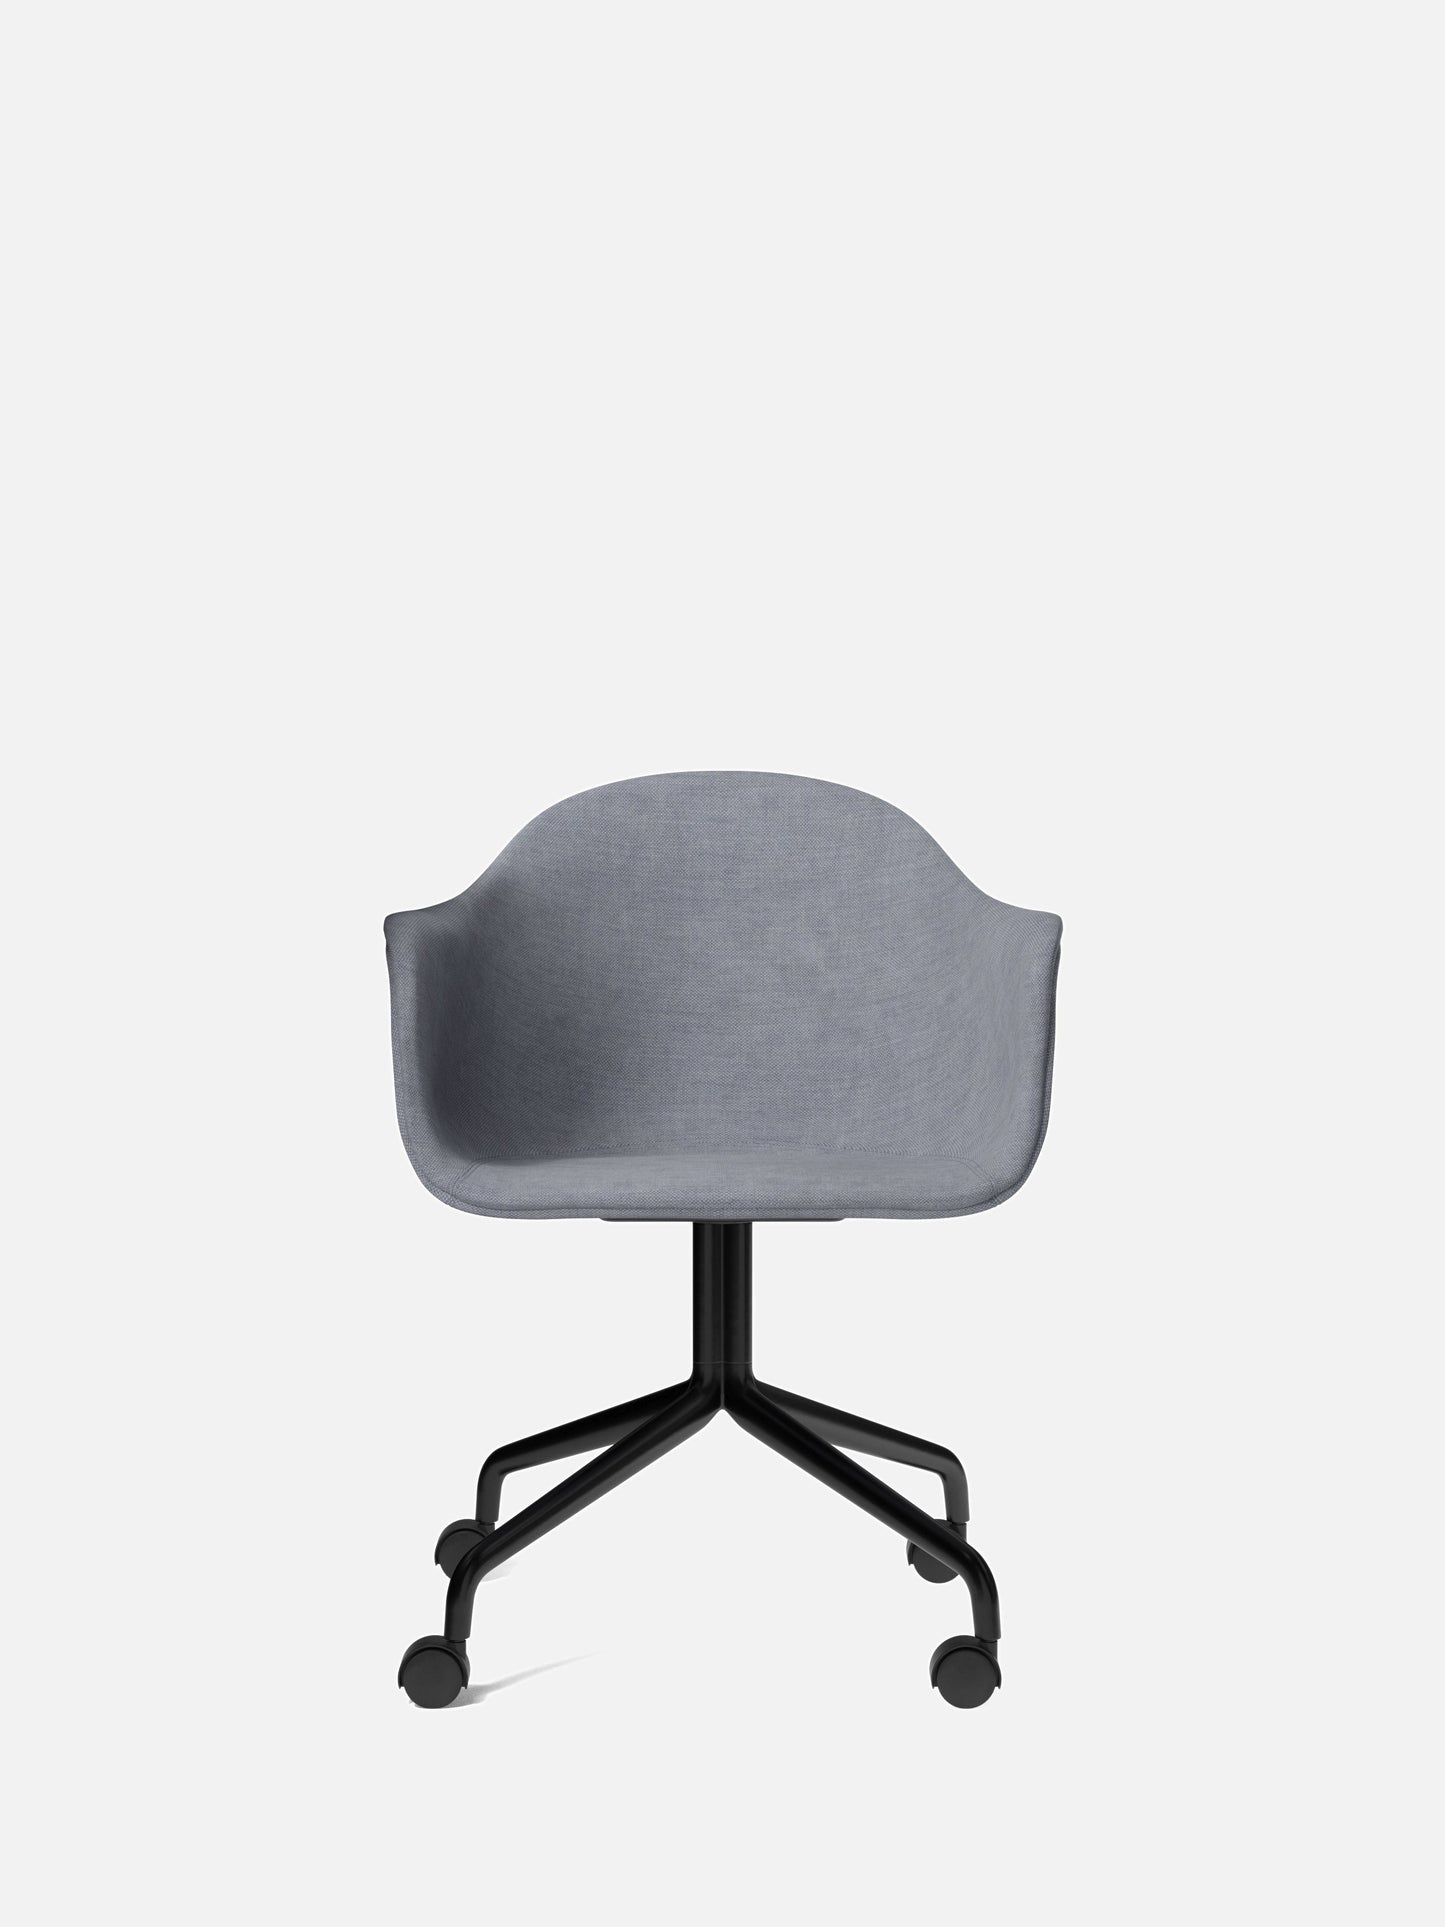 Harbour Arm Chair, Upholstered-Chair-Norm Architects-Star Base (Seat 17.7in H)/Black Steel w. Casters-751/Fiord2-menu-minimalist-modern-danish-design-home-decor